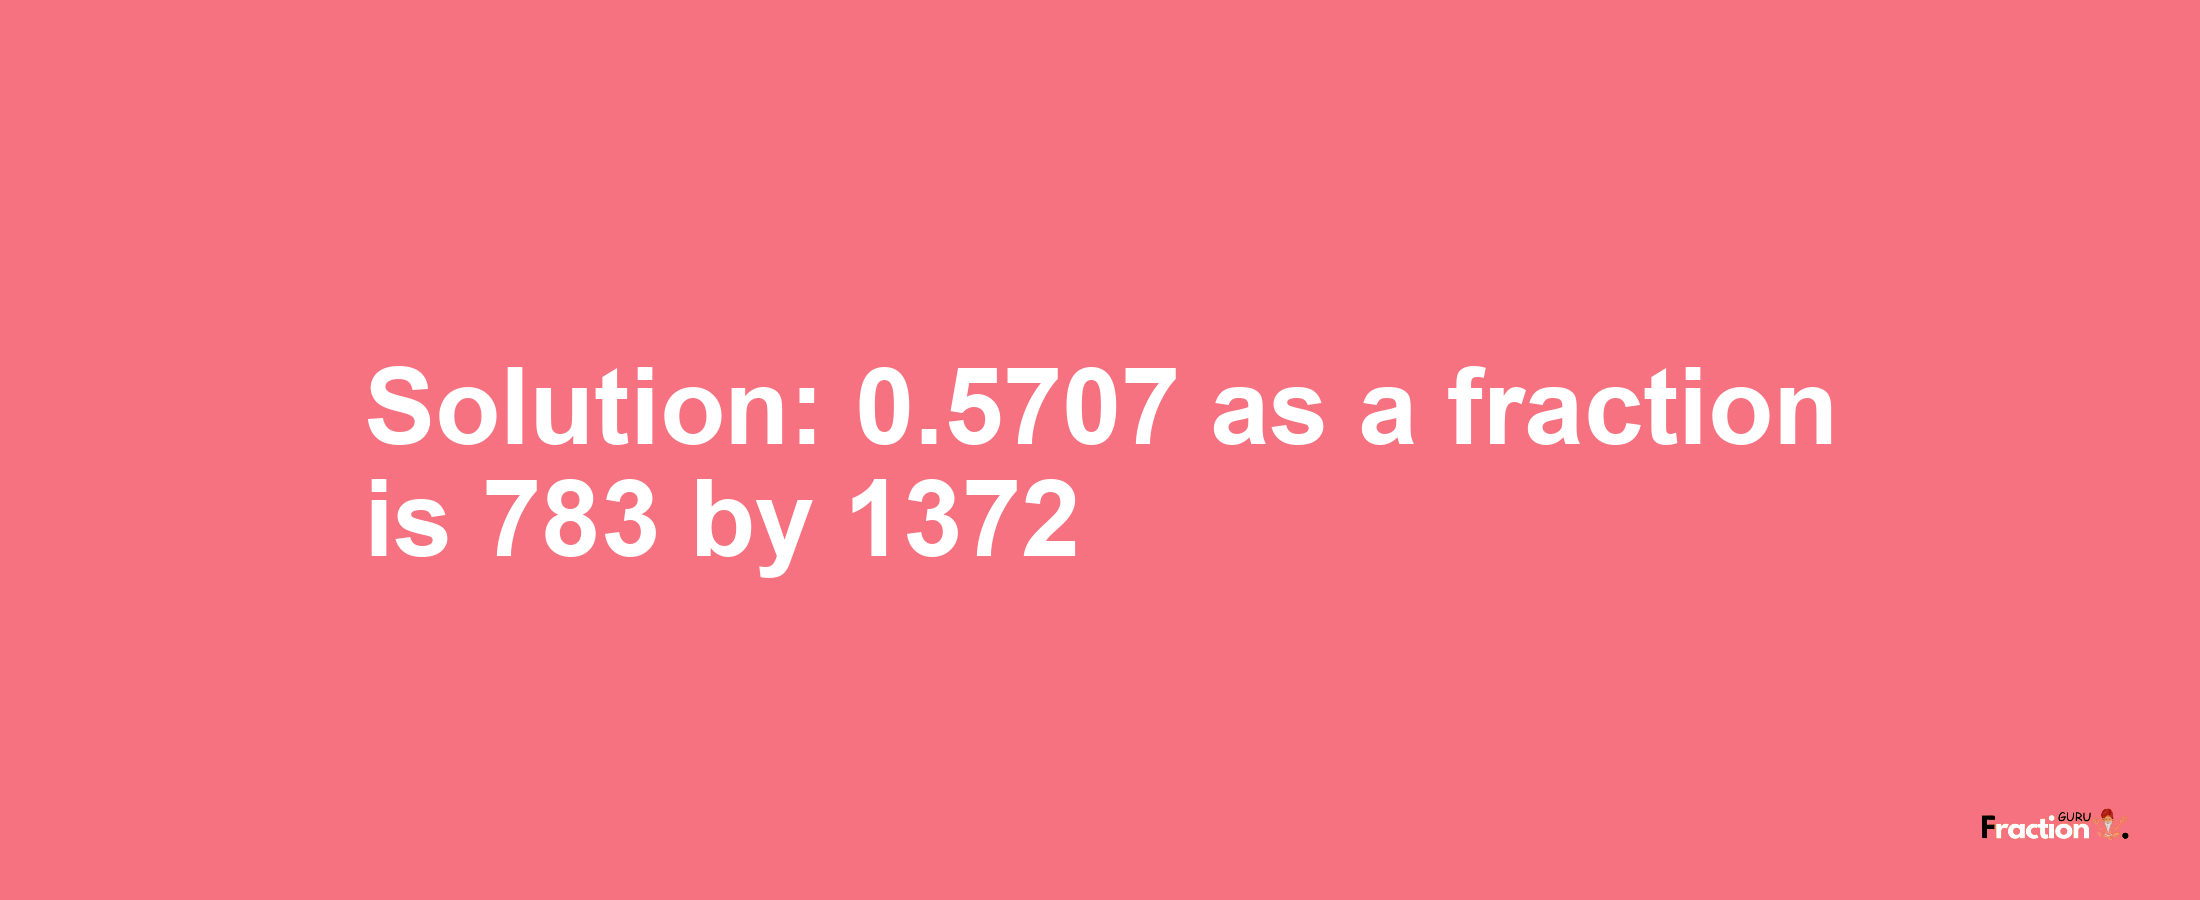 Solution:0.5707 as a fraction is 783/1372